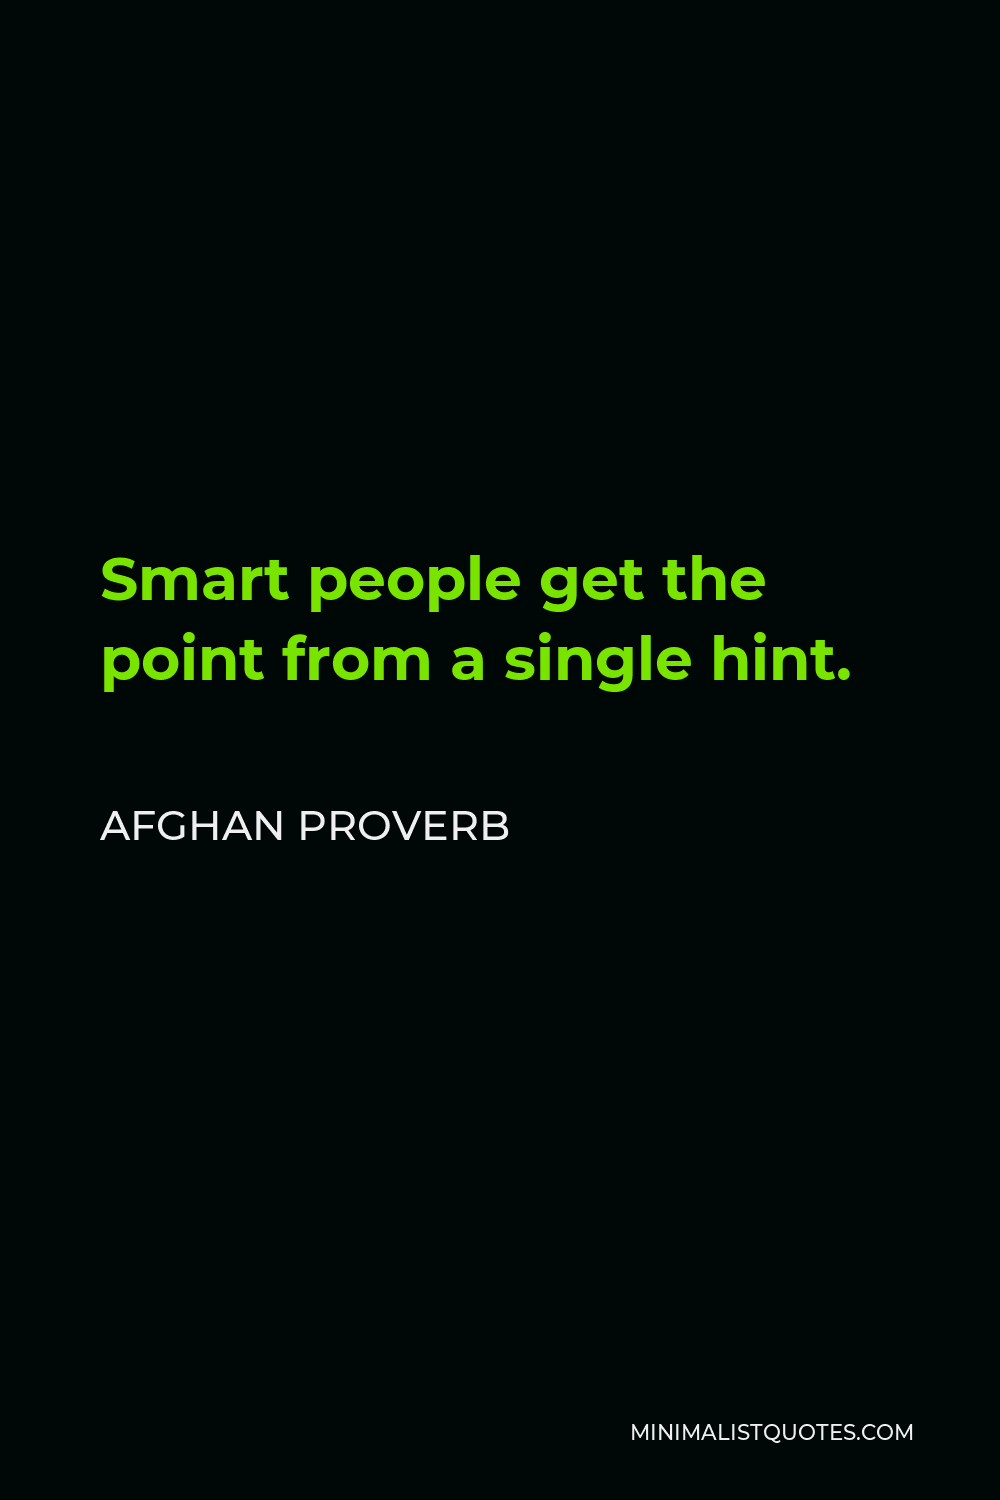 Afghan Proverb Quote - Smart people get the point from a single hint.